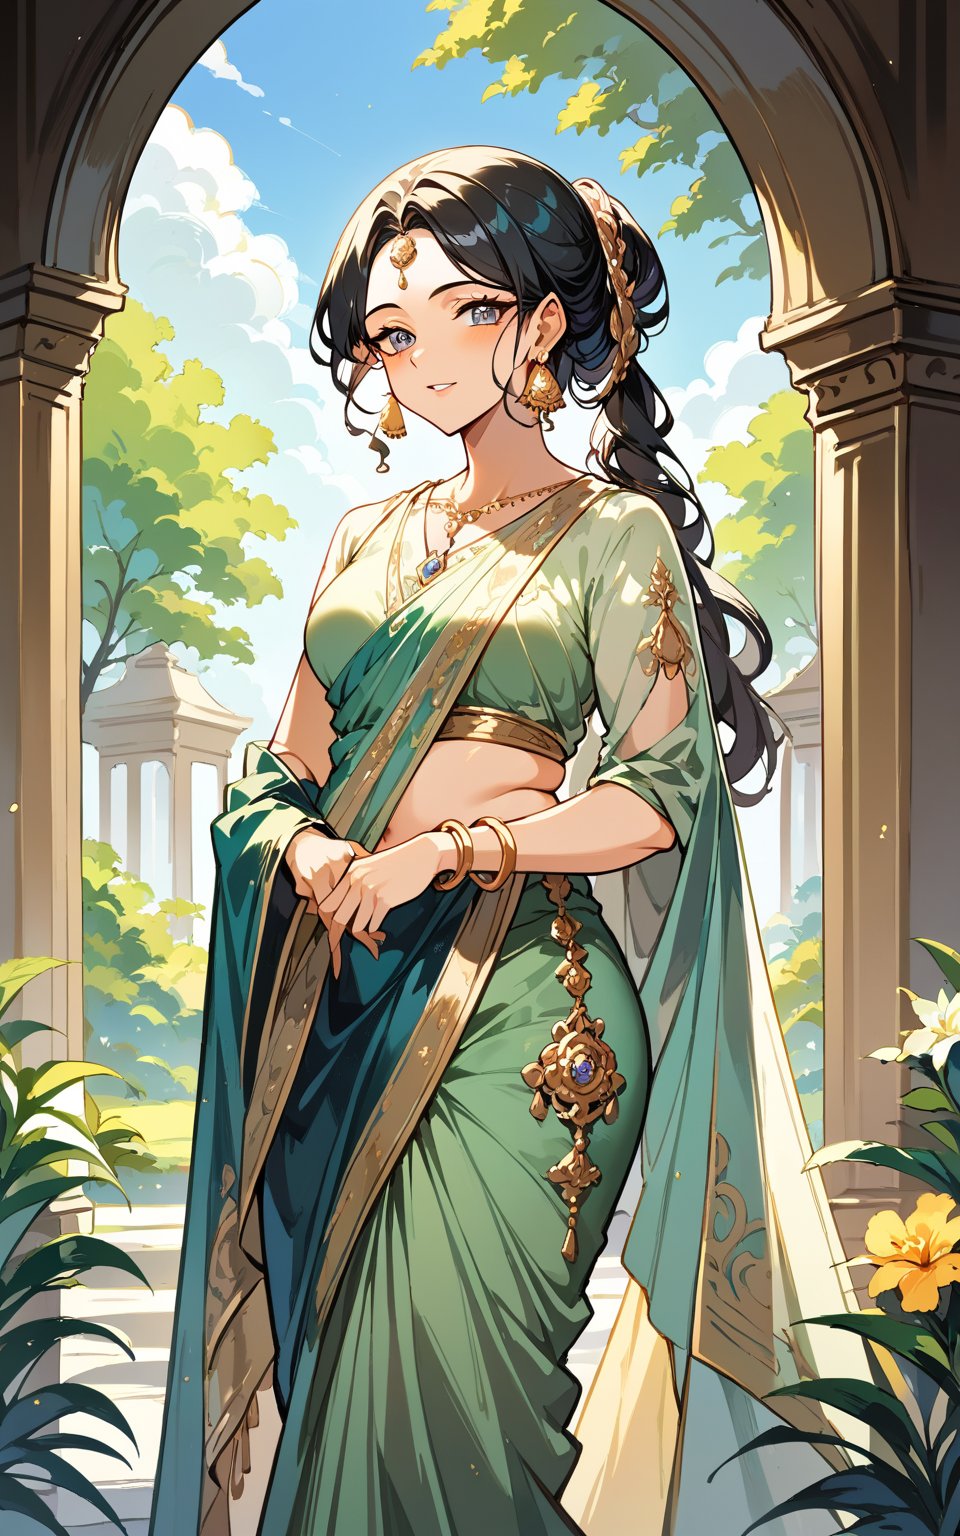 score_9,score_8_up,score_7_up, A striking portrait of an alluring, chubby Indian woman adorned in an intricately designed sari, walking amidst a lush, verdant landscape. The long, cascading ponytail frames her beautiful, black hair, and her ears glisten with exquisite, art nouveau-inspired earrings. The overall composition offers a marriage of realism and detailed craftsmanship, emphasizing the fashionable elegance of the subject while capturing the essence of traditional Indian beauty.